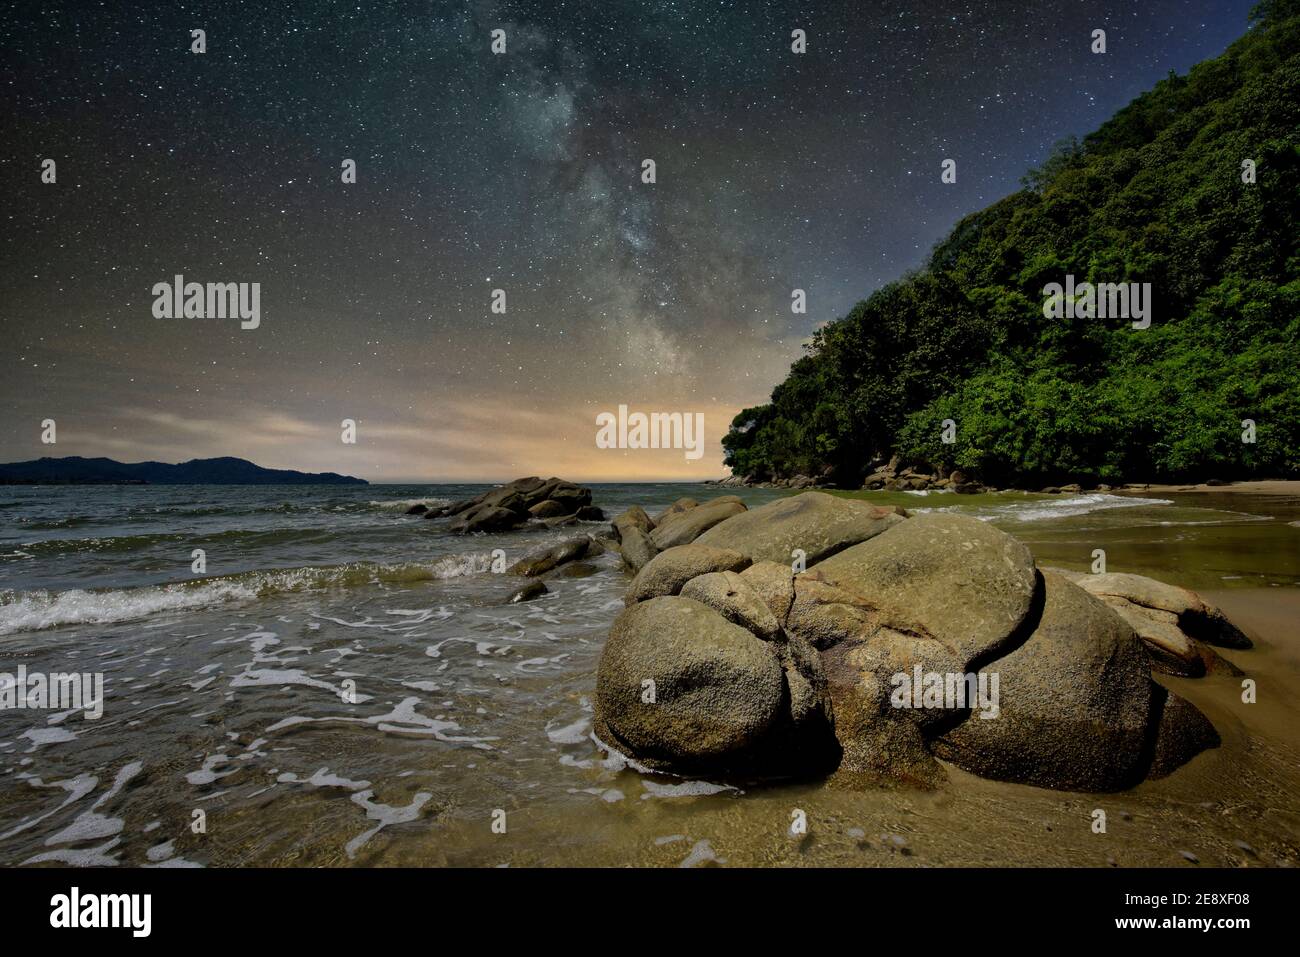 The Milky Way is visible in the night sky when viewed from the beach outside the Shangri La Rasa Ria Hotel at Kota Kinabalu, Borneo, Malaysia Stock Photo